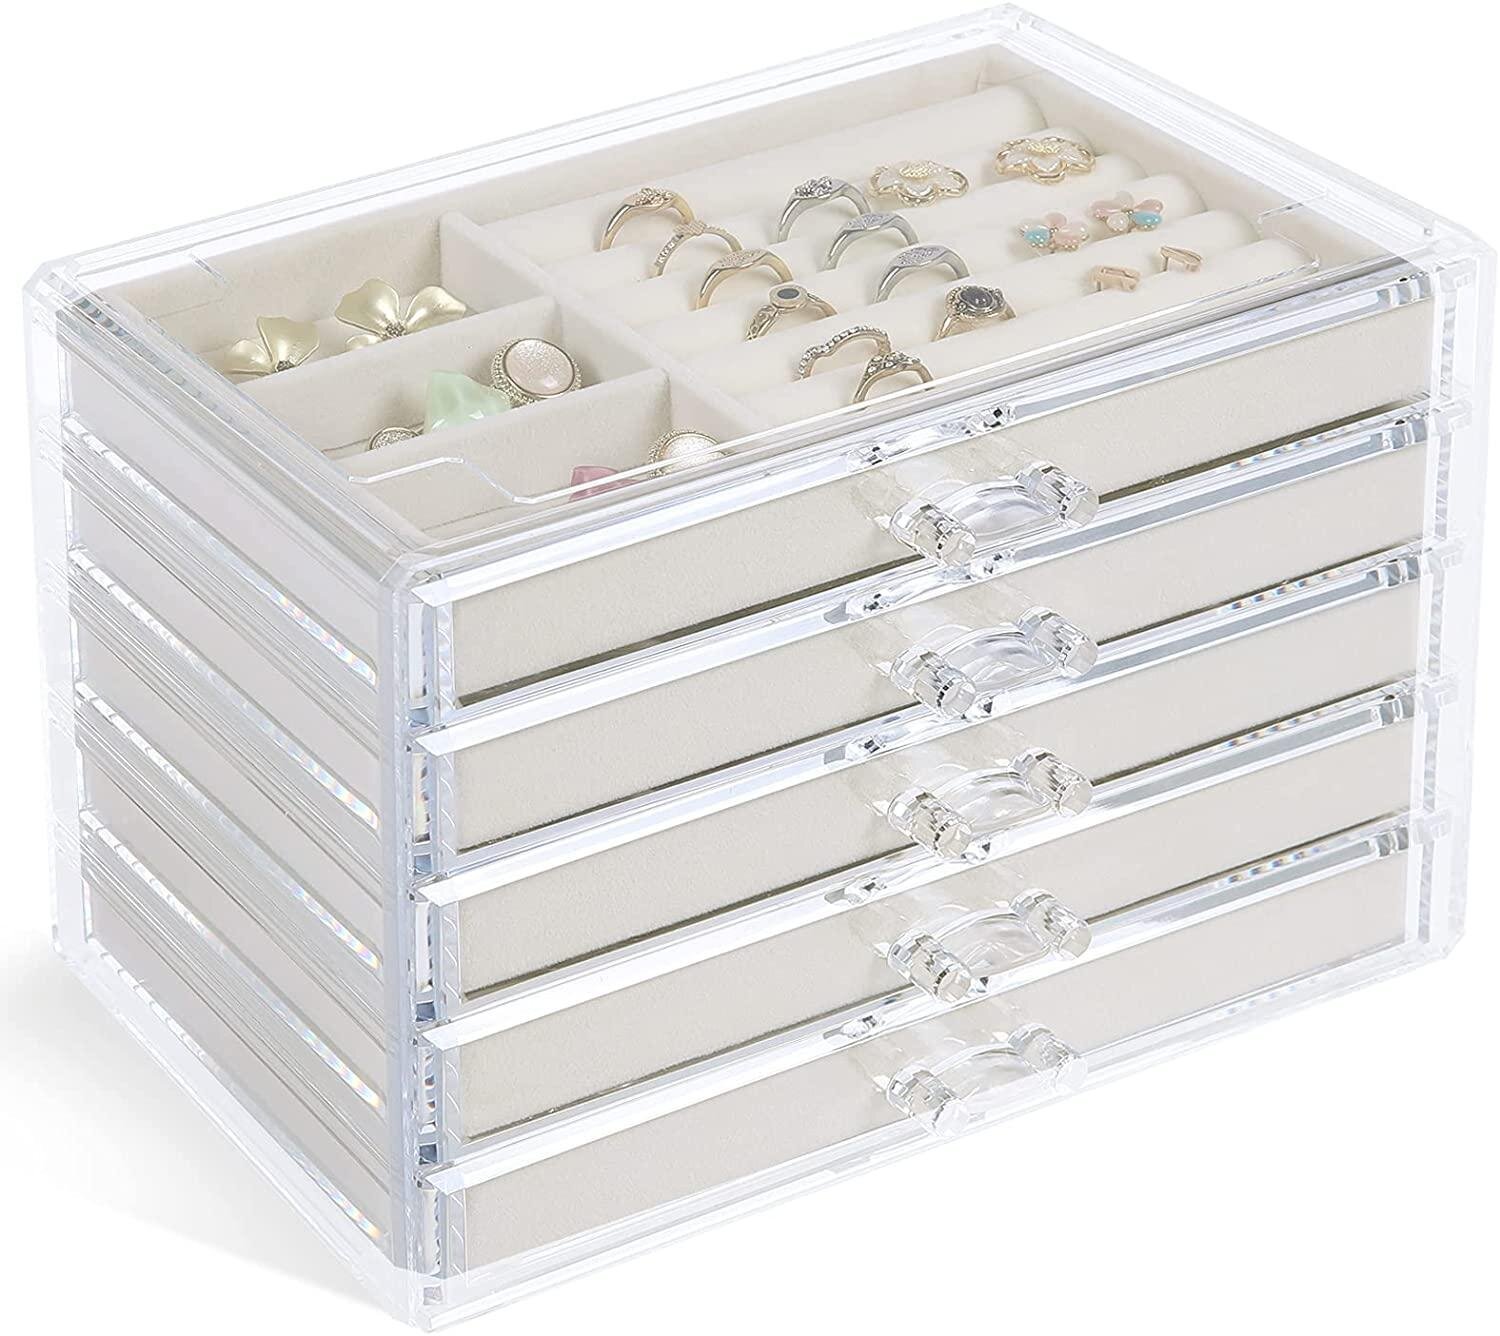 3 Acrylic Top Jewelry Display Storage Cases With 12 Compartment Gray Inserts 